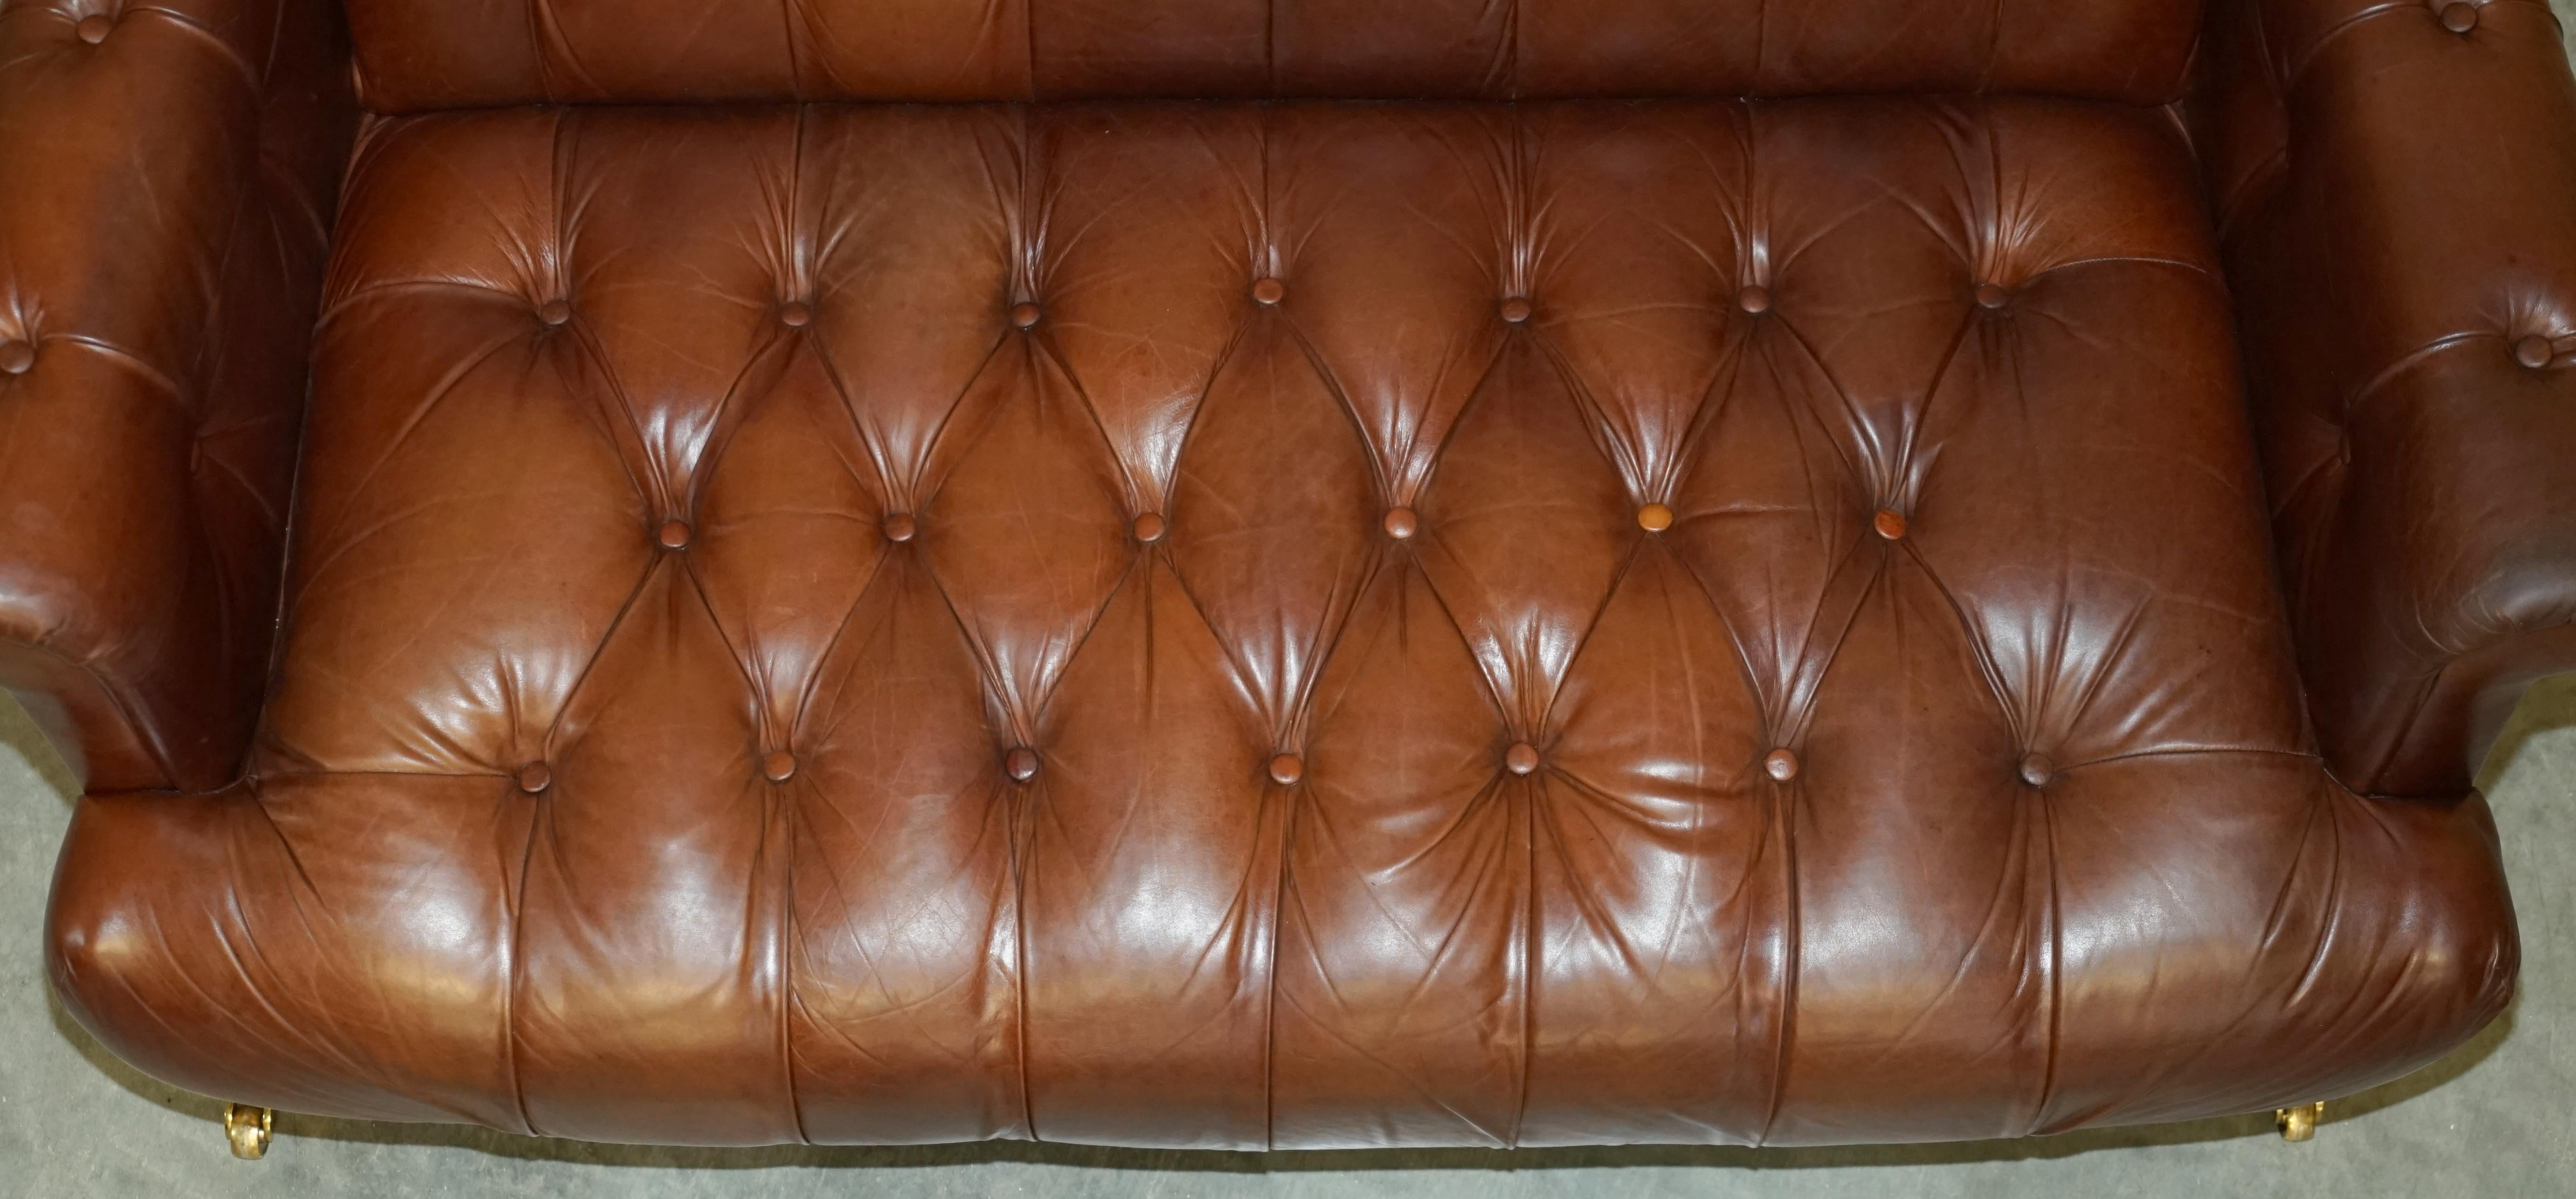 FiNE CHESTNUT BROWN LEATHER LAUREN ASHLEY CHESTERFIELD TWO SEAT LIBRARY SOFa For Sale 6